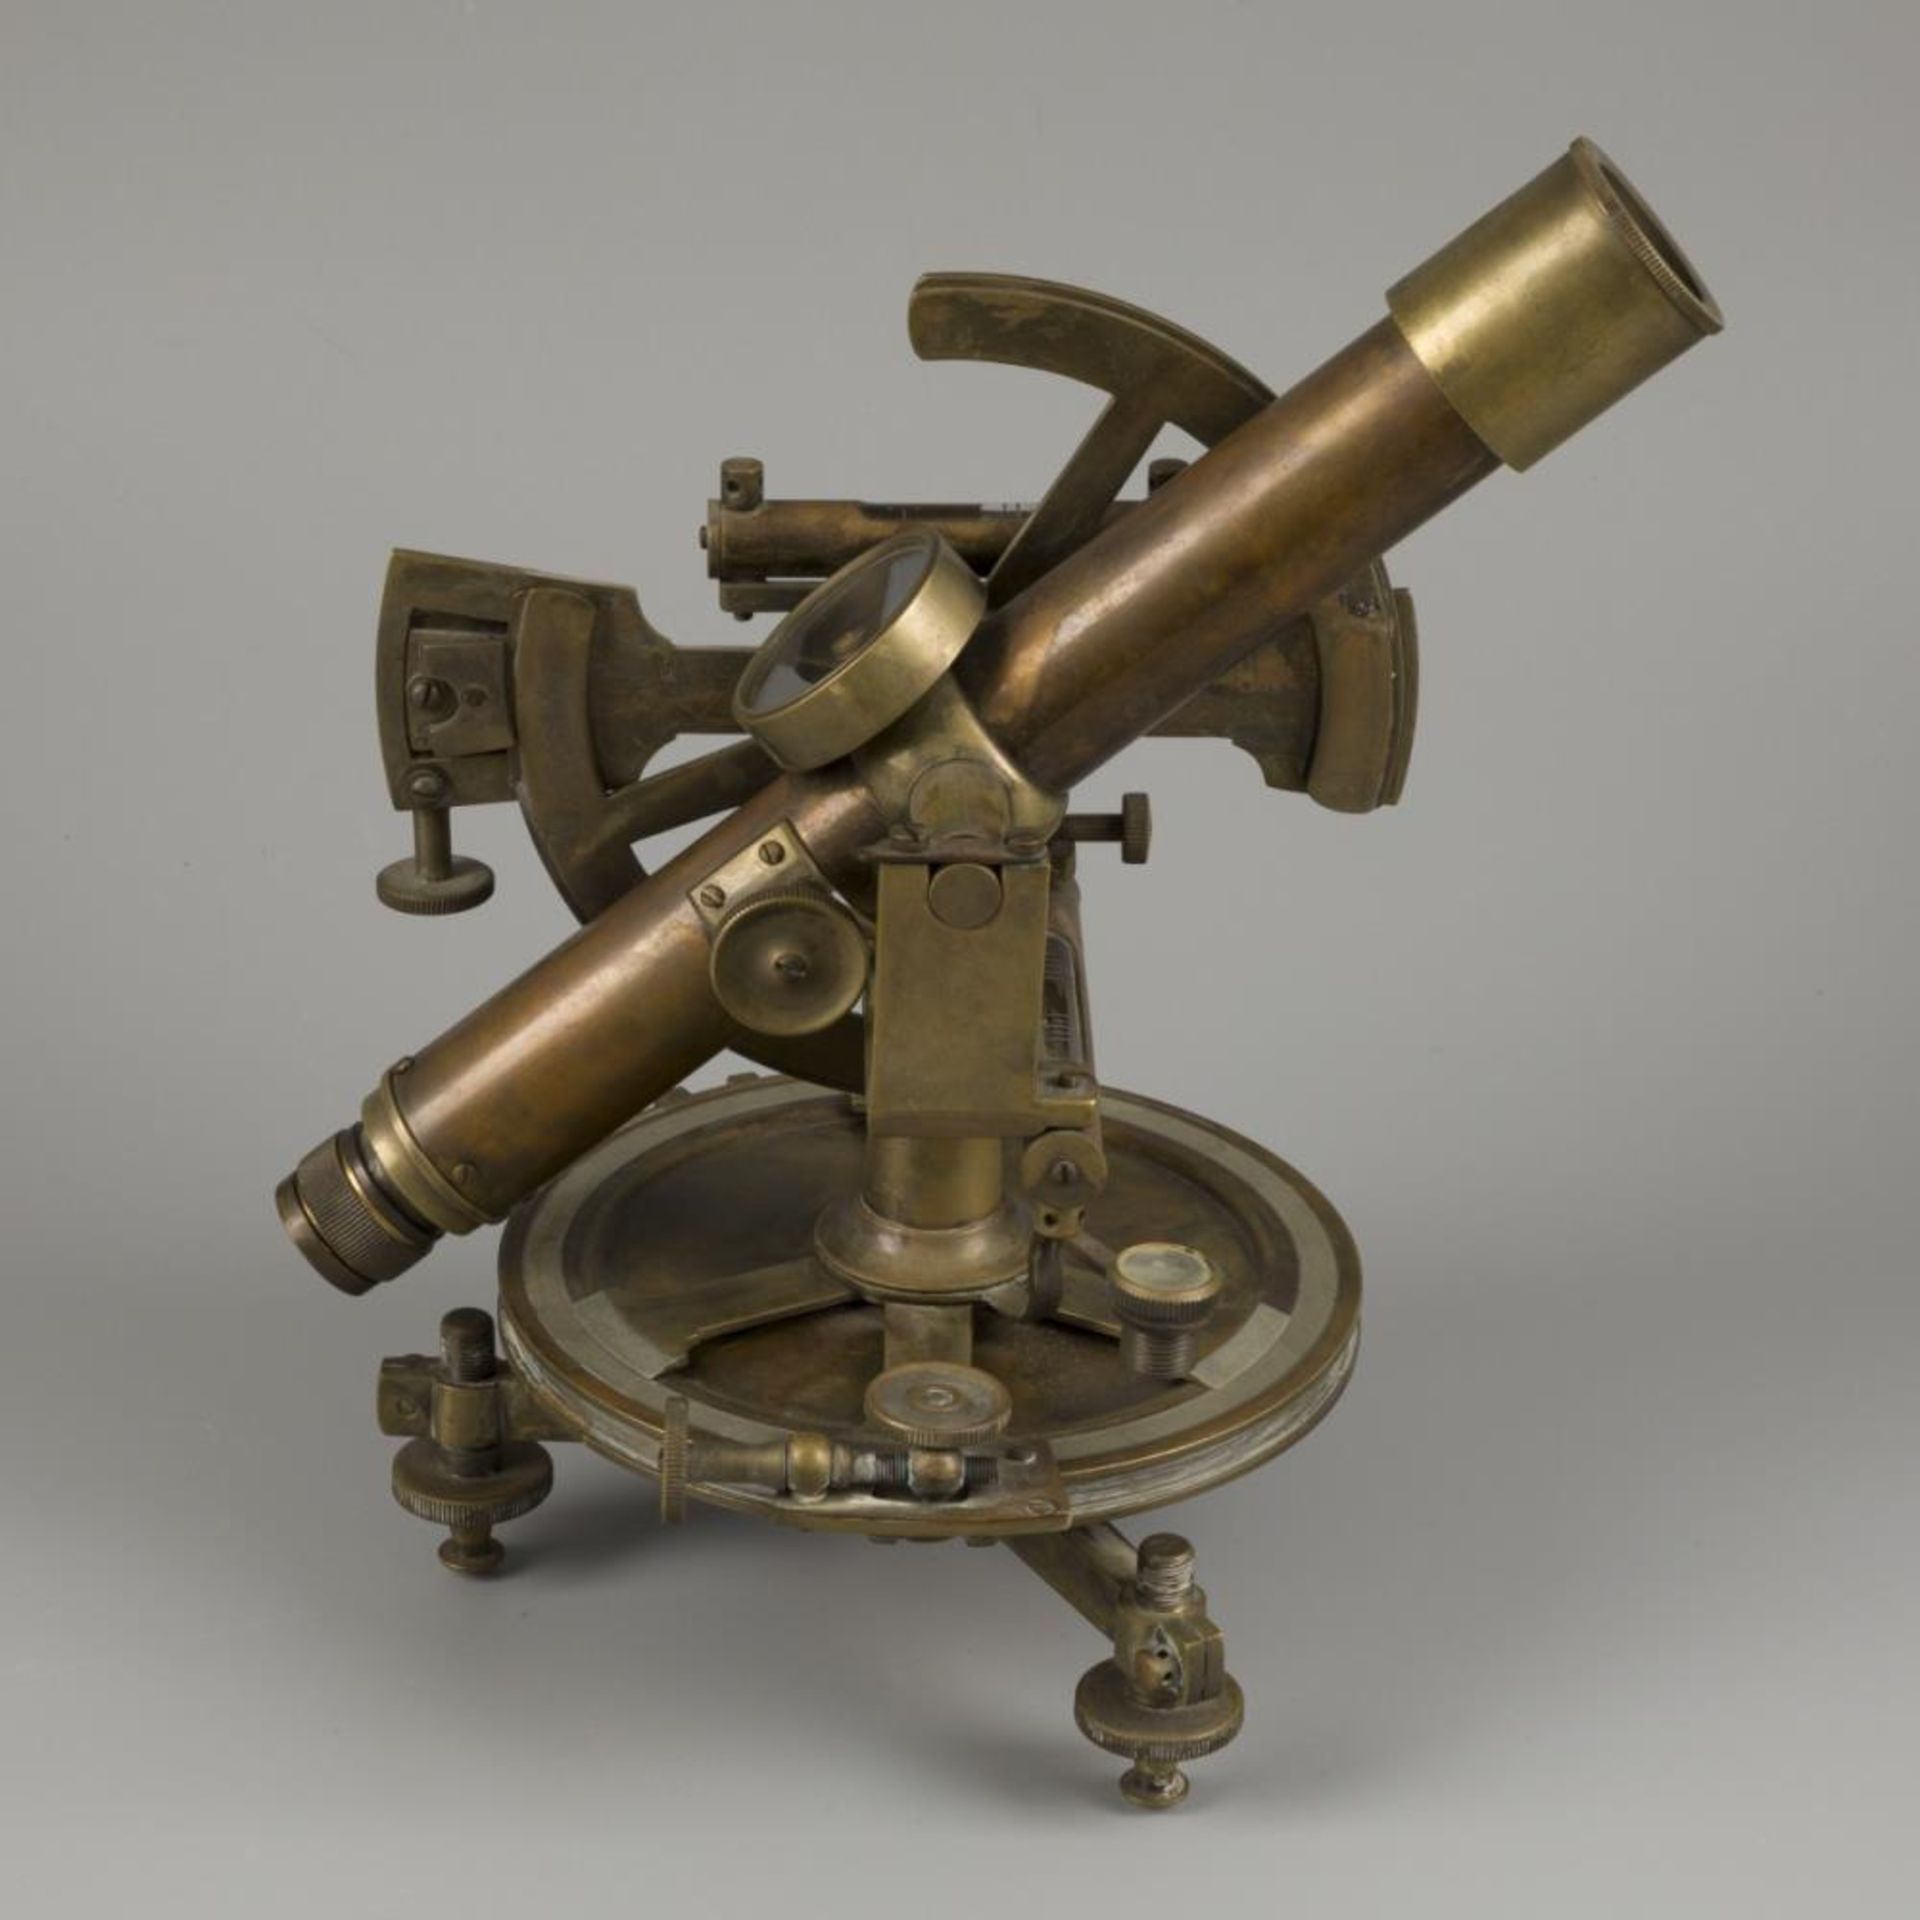 A brass surveyors' spirit level instrument with compass (transit/ theodolite), Germany, early 20th c - Image 2 of 4